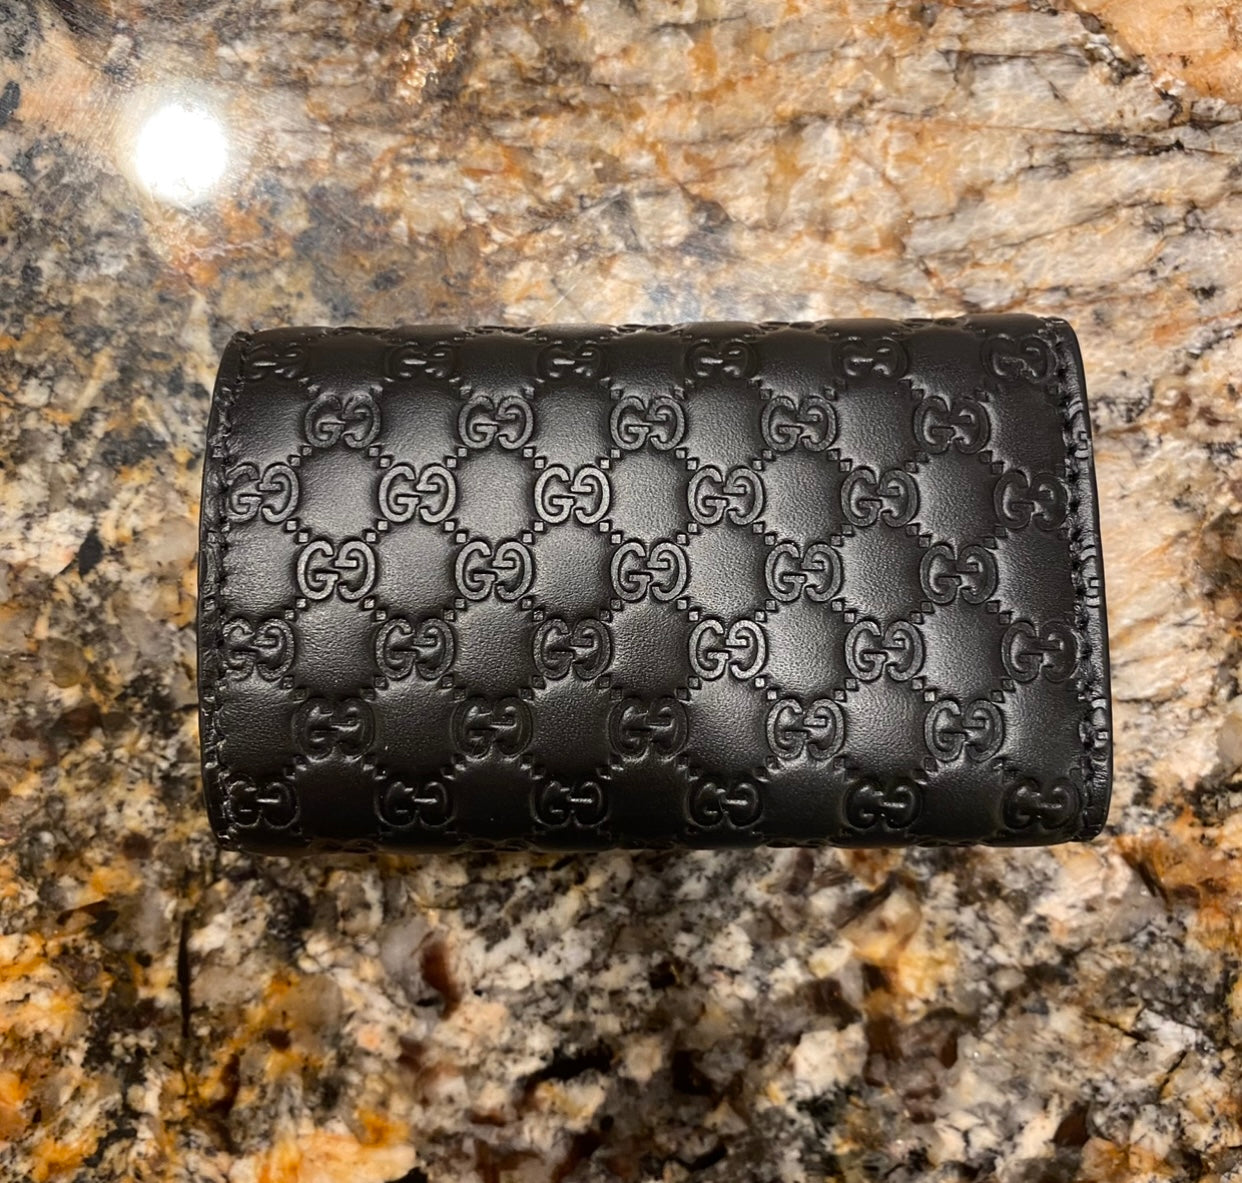 Authenticated Used Gucci key case/key holder GUCCI 6 row sima leather black  138093 